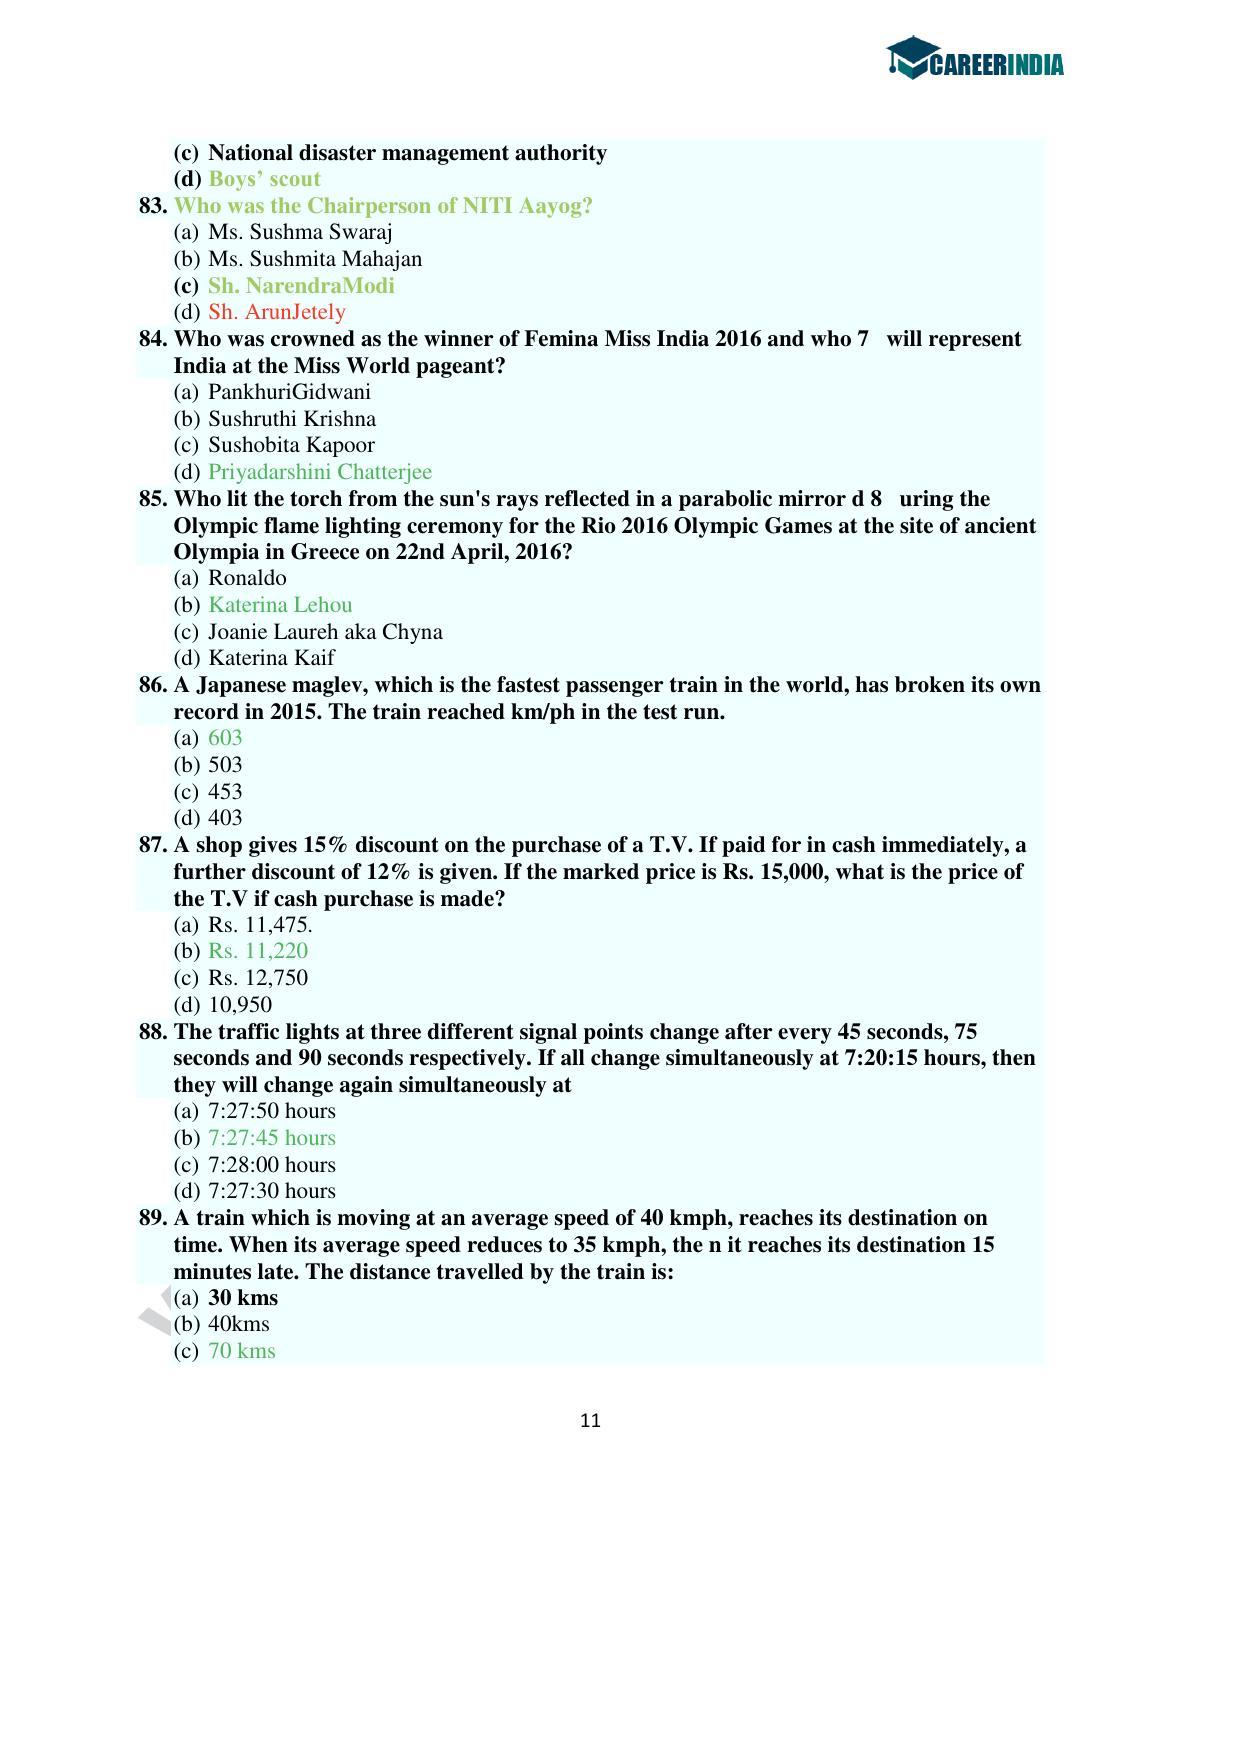 CLAT 2016 UG Question Paper with Answer Key - Page 11